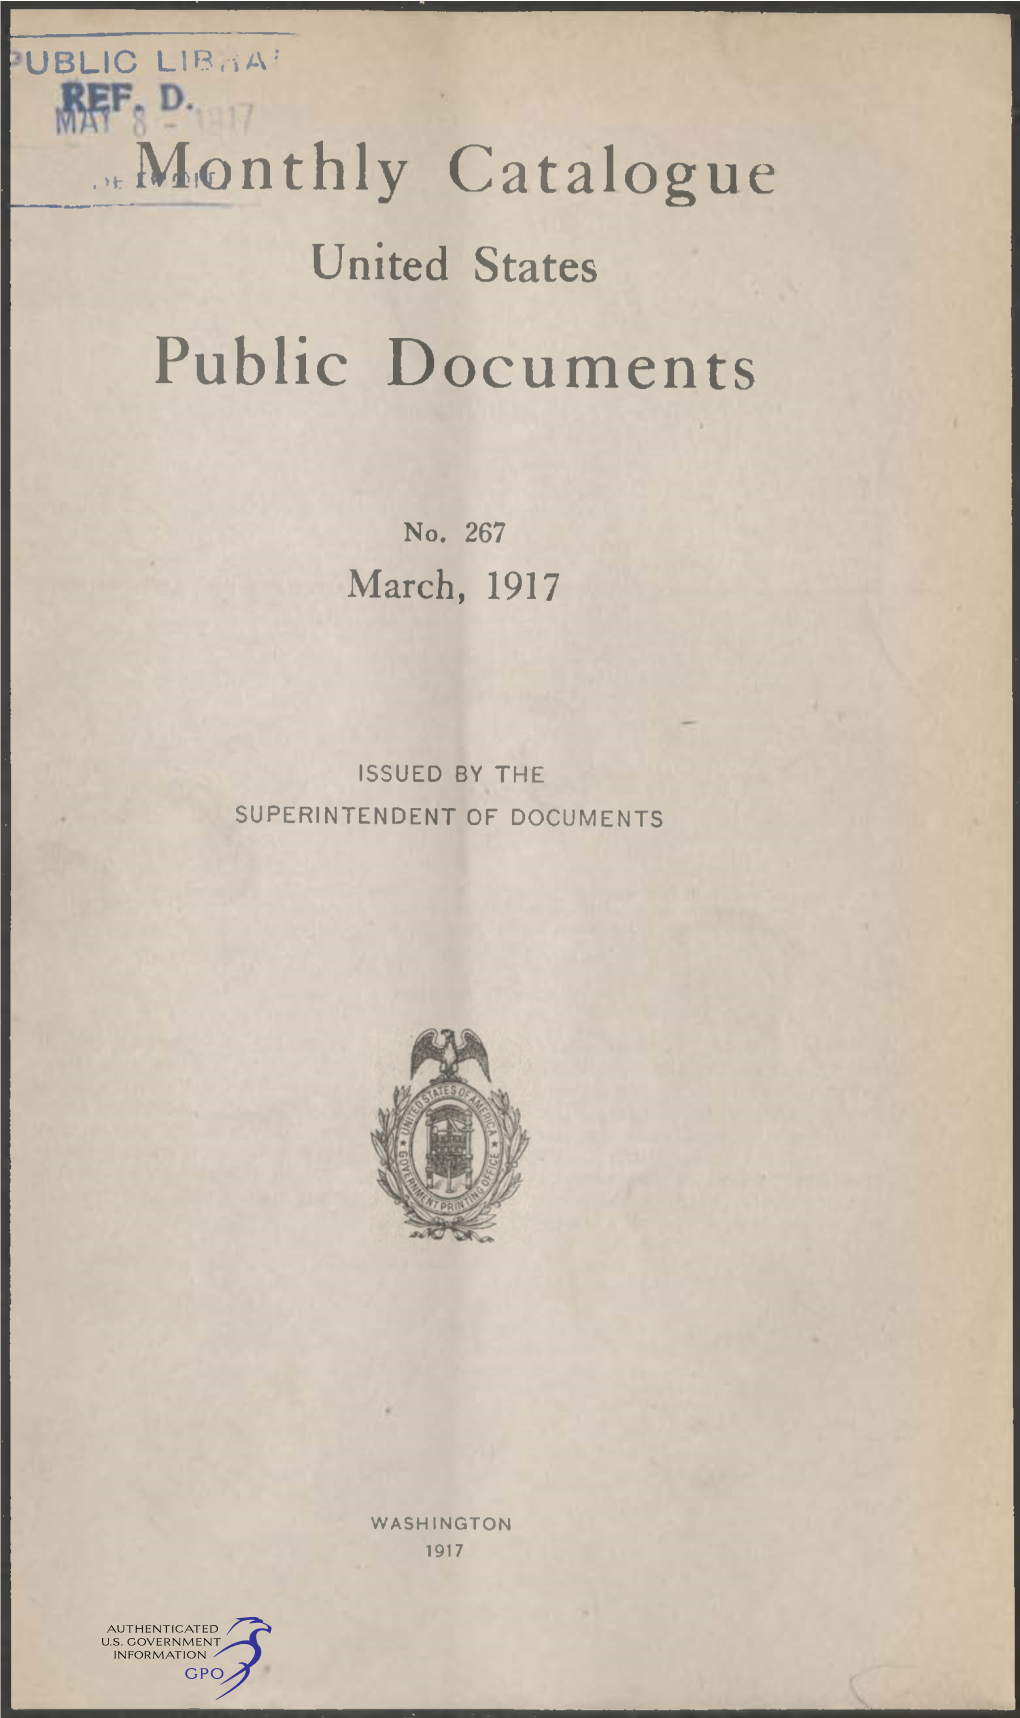 Monthly Catalogue, United States Public Documents, March 1917